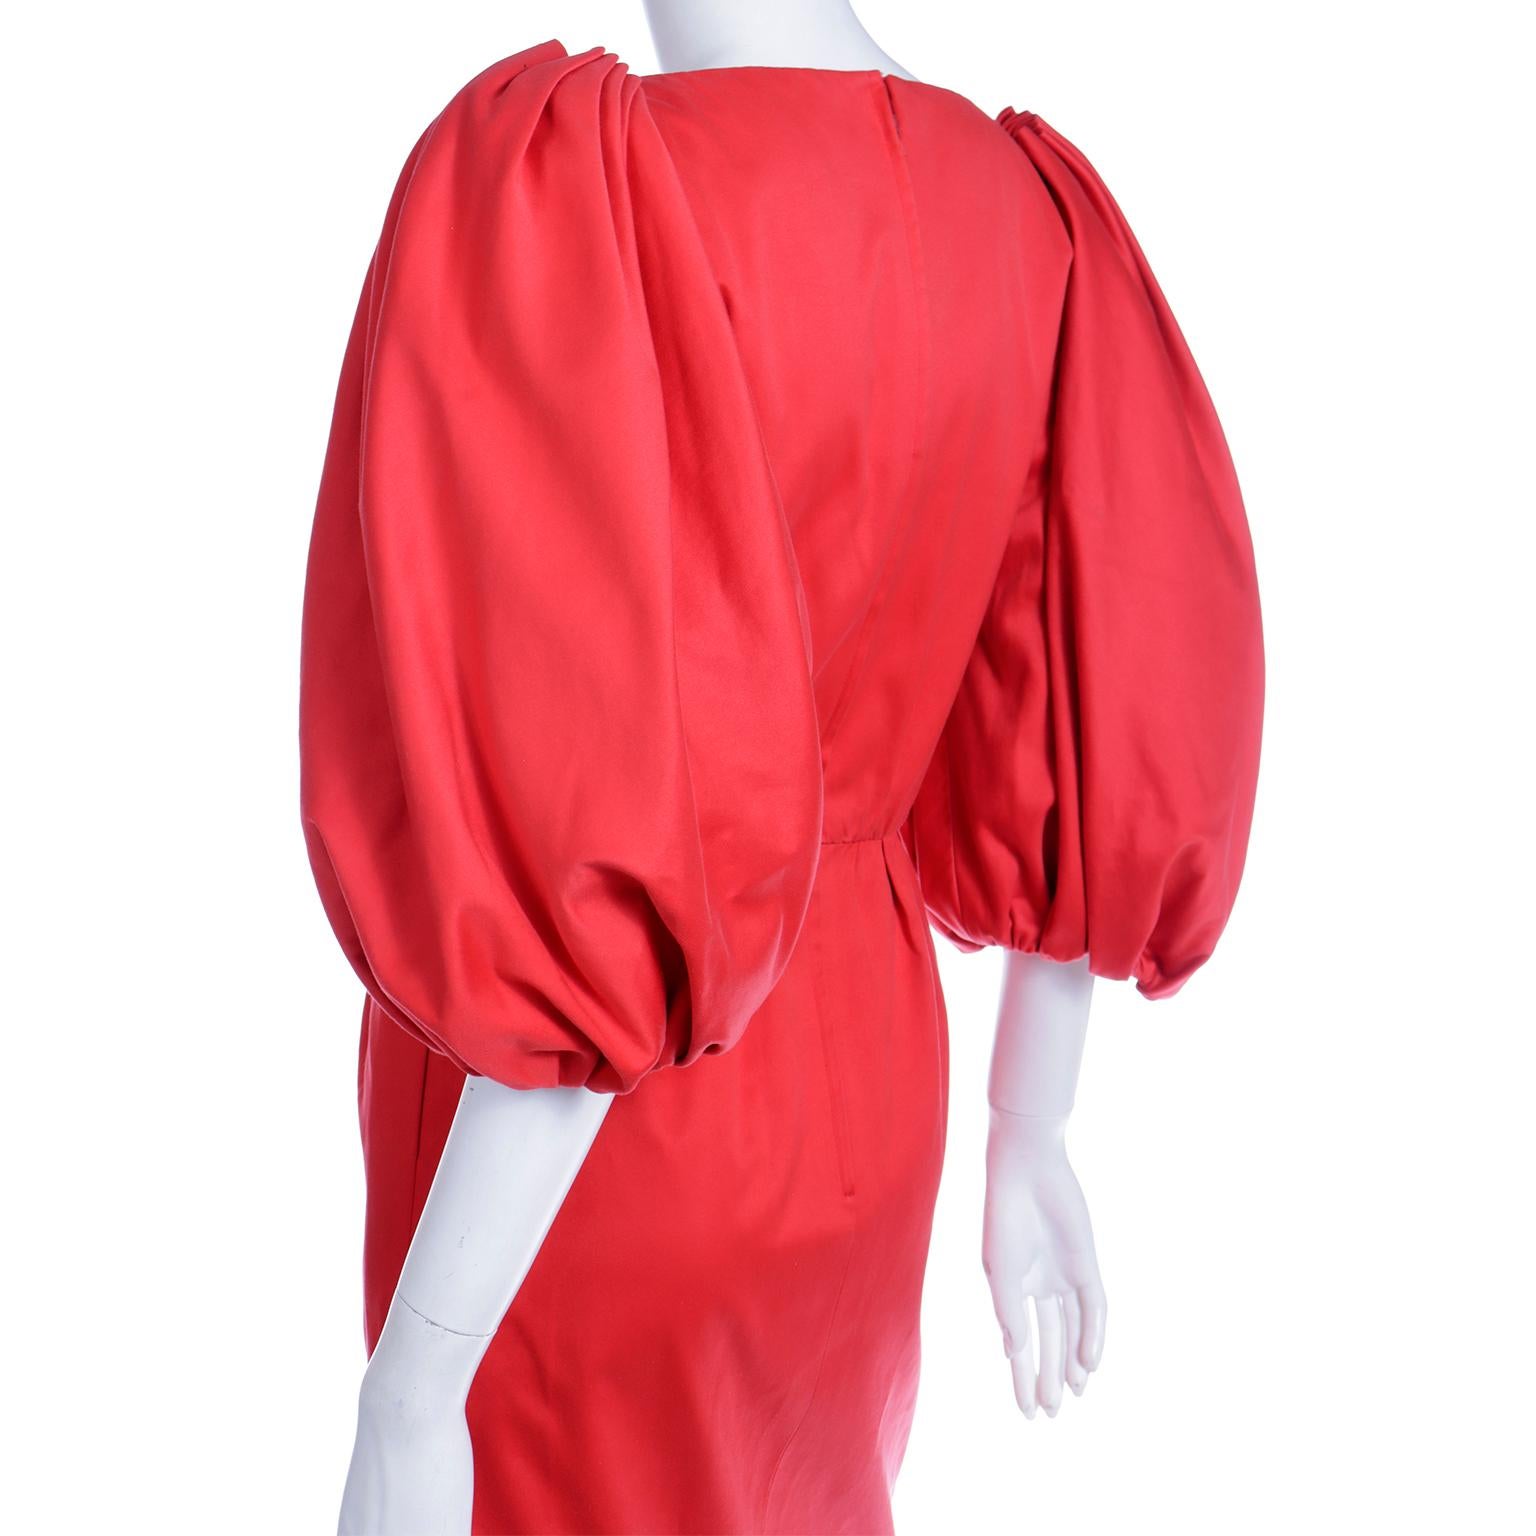 Yves Saint Laurent 1989 Vintage Red Runway Dress with Puff Statement Sleeves 7